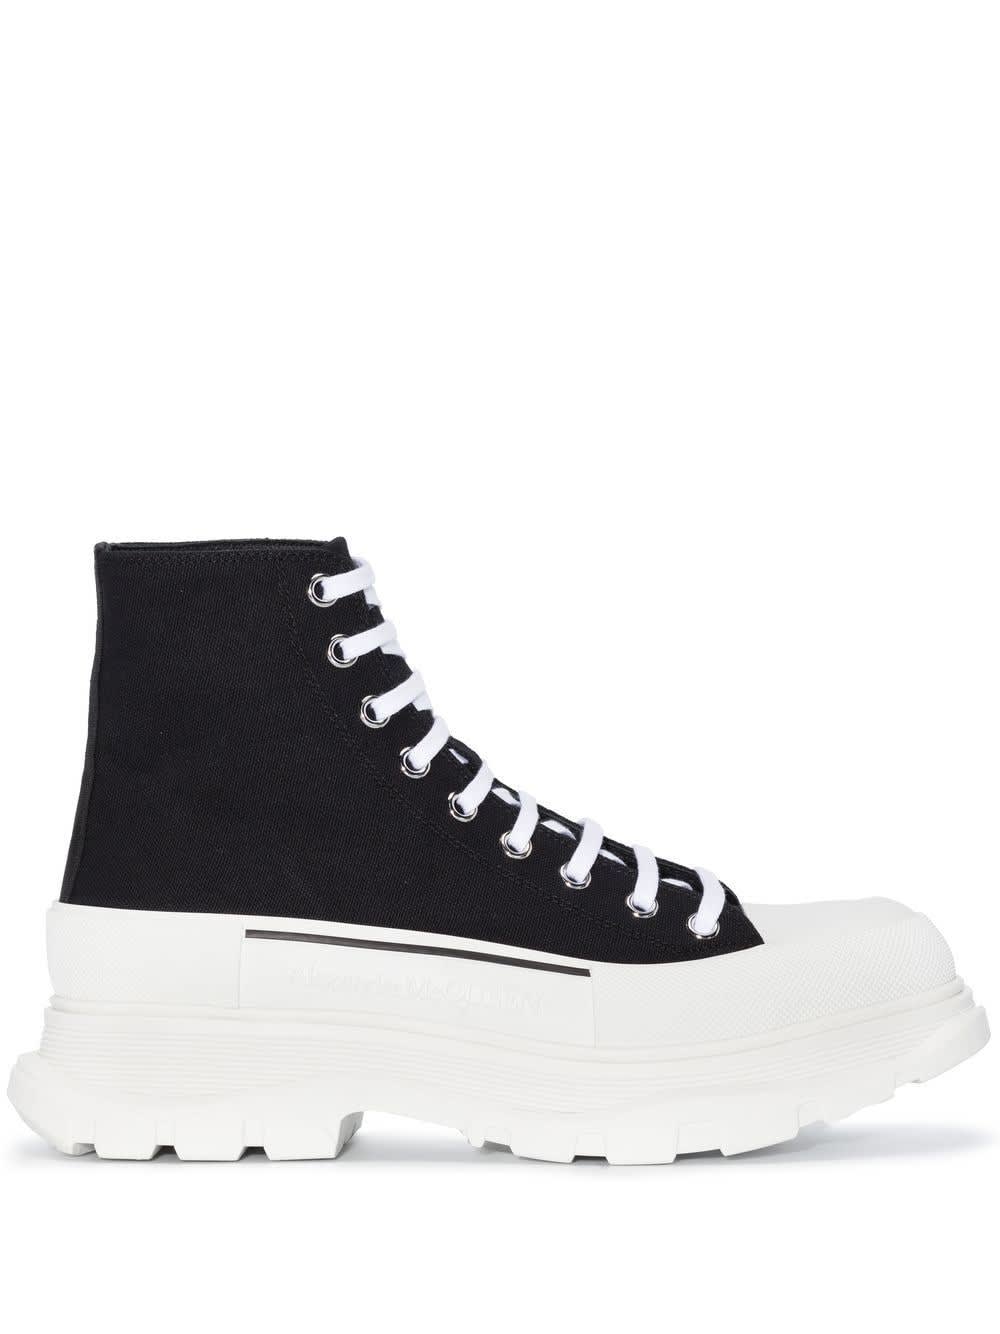 Black And White Tread Slick Ankle Boots